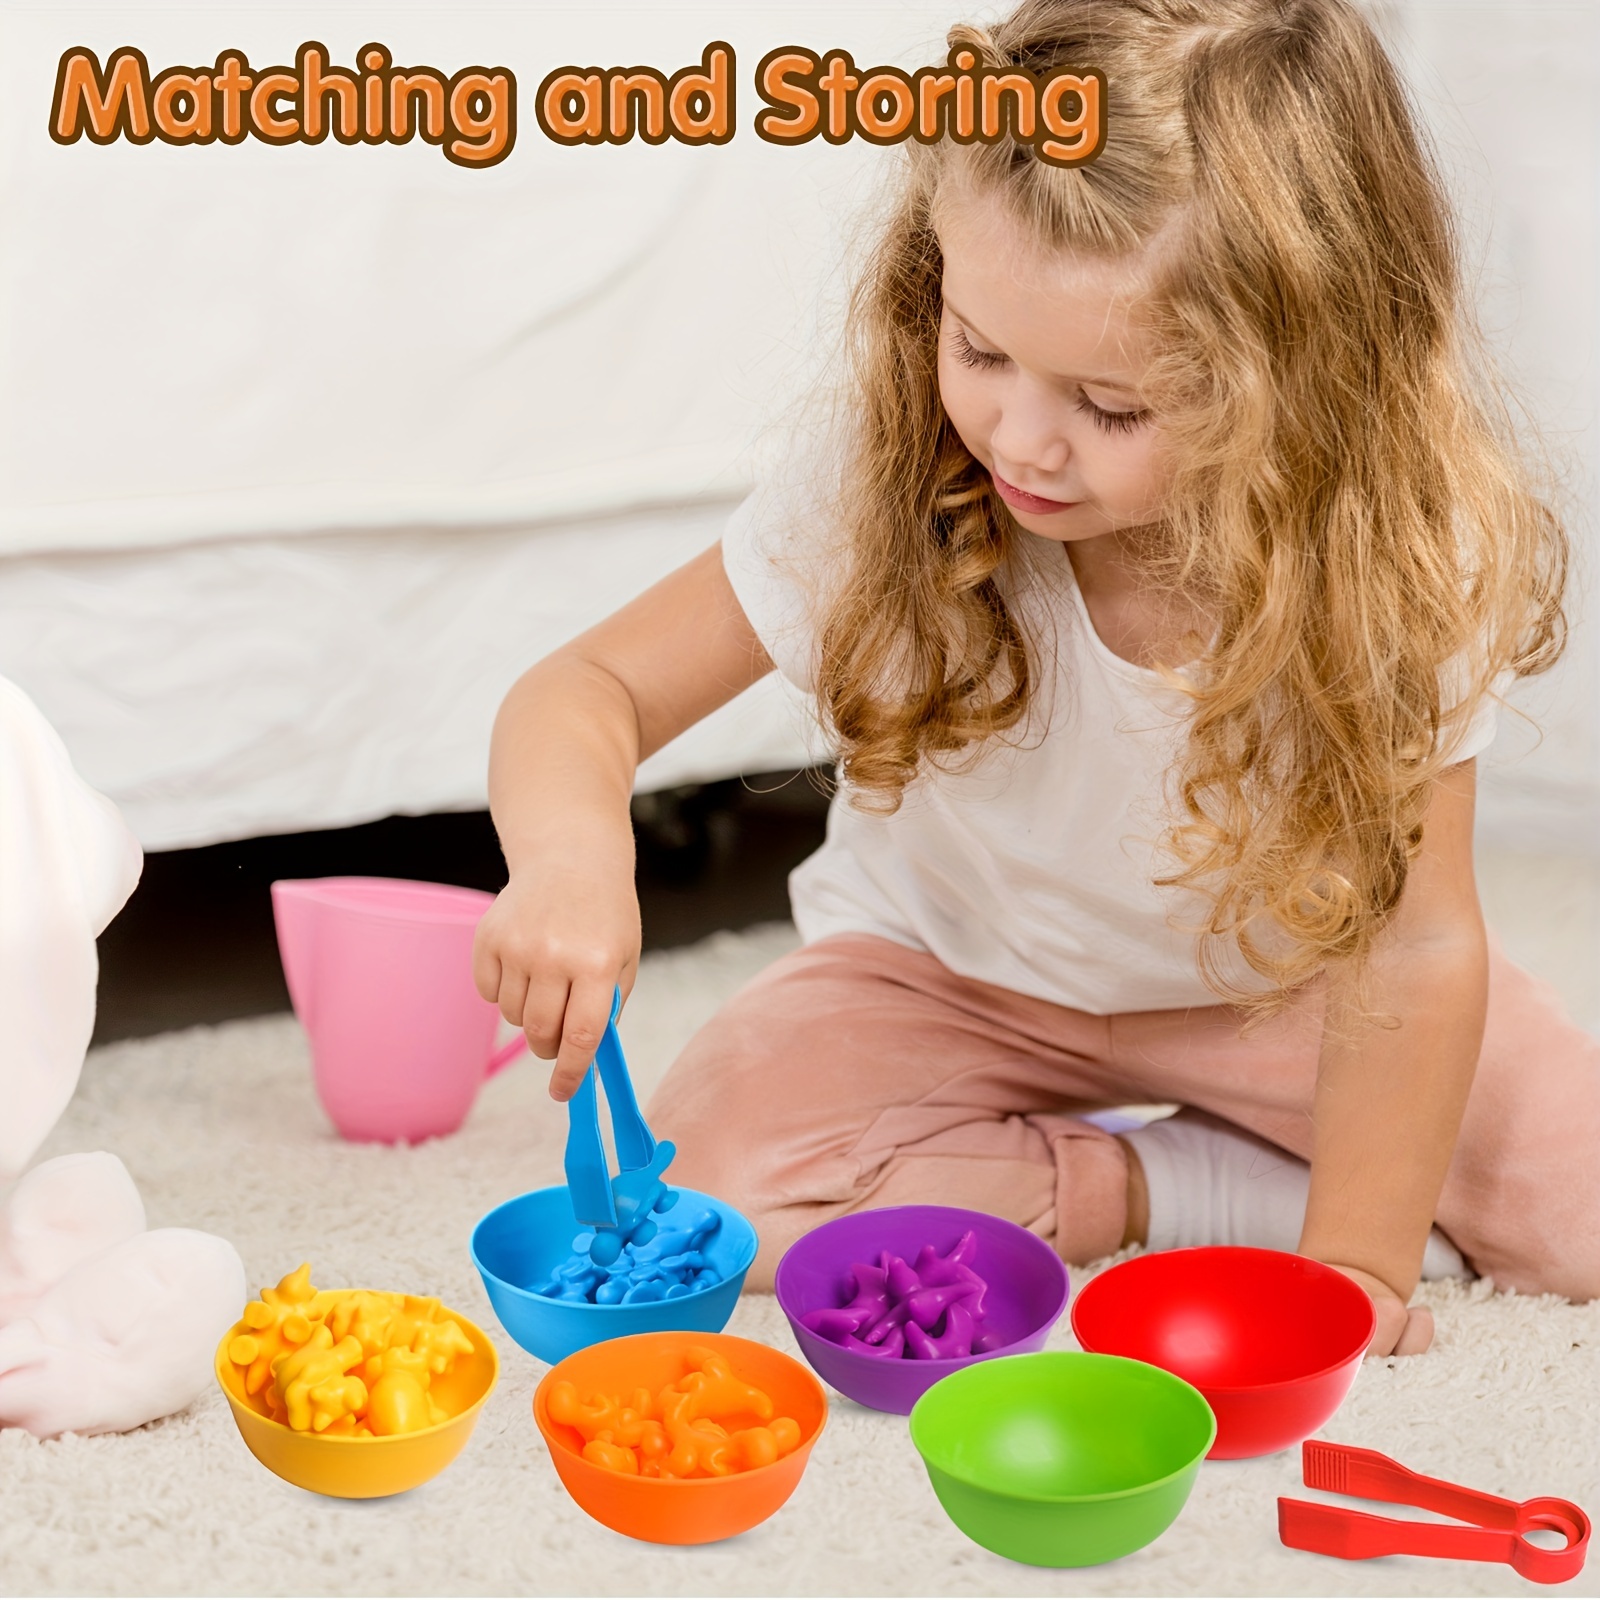  Counting Animal Matching Games Color Sorting Toys with Bowls  Preschool Learning Activities for Math Educational Sensory Training  Montessori STEM Toy Sets Gift for Toddlers Kids Boys Girls Ages 3 4 5